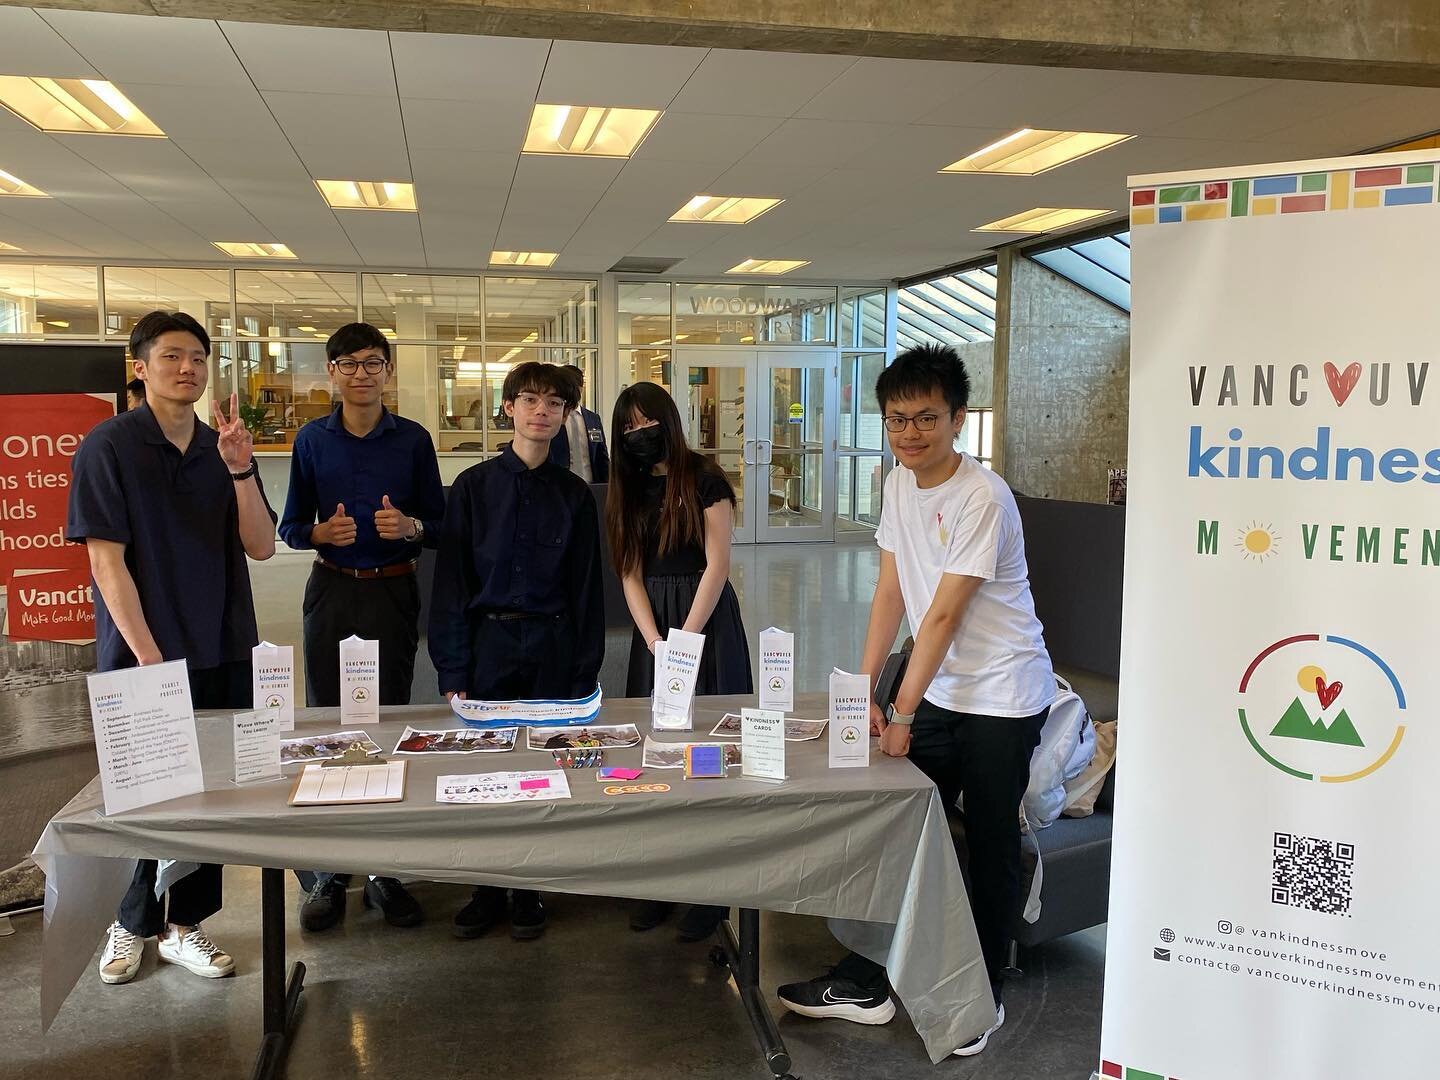 Thank you to everyone who came by our booth at @prospervancouver yesterday. It was nice connecting with so many likeminded youth 🤩💚

Special thanks to @viya_mxc @_disobliged @trina_._aa @lukepielak @ypa_0204 @mmarcuswongg